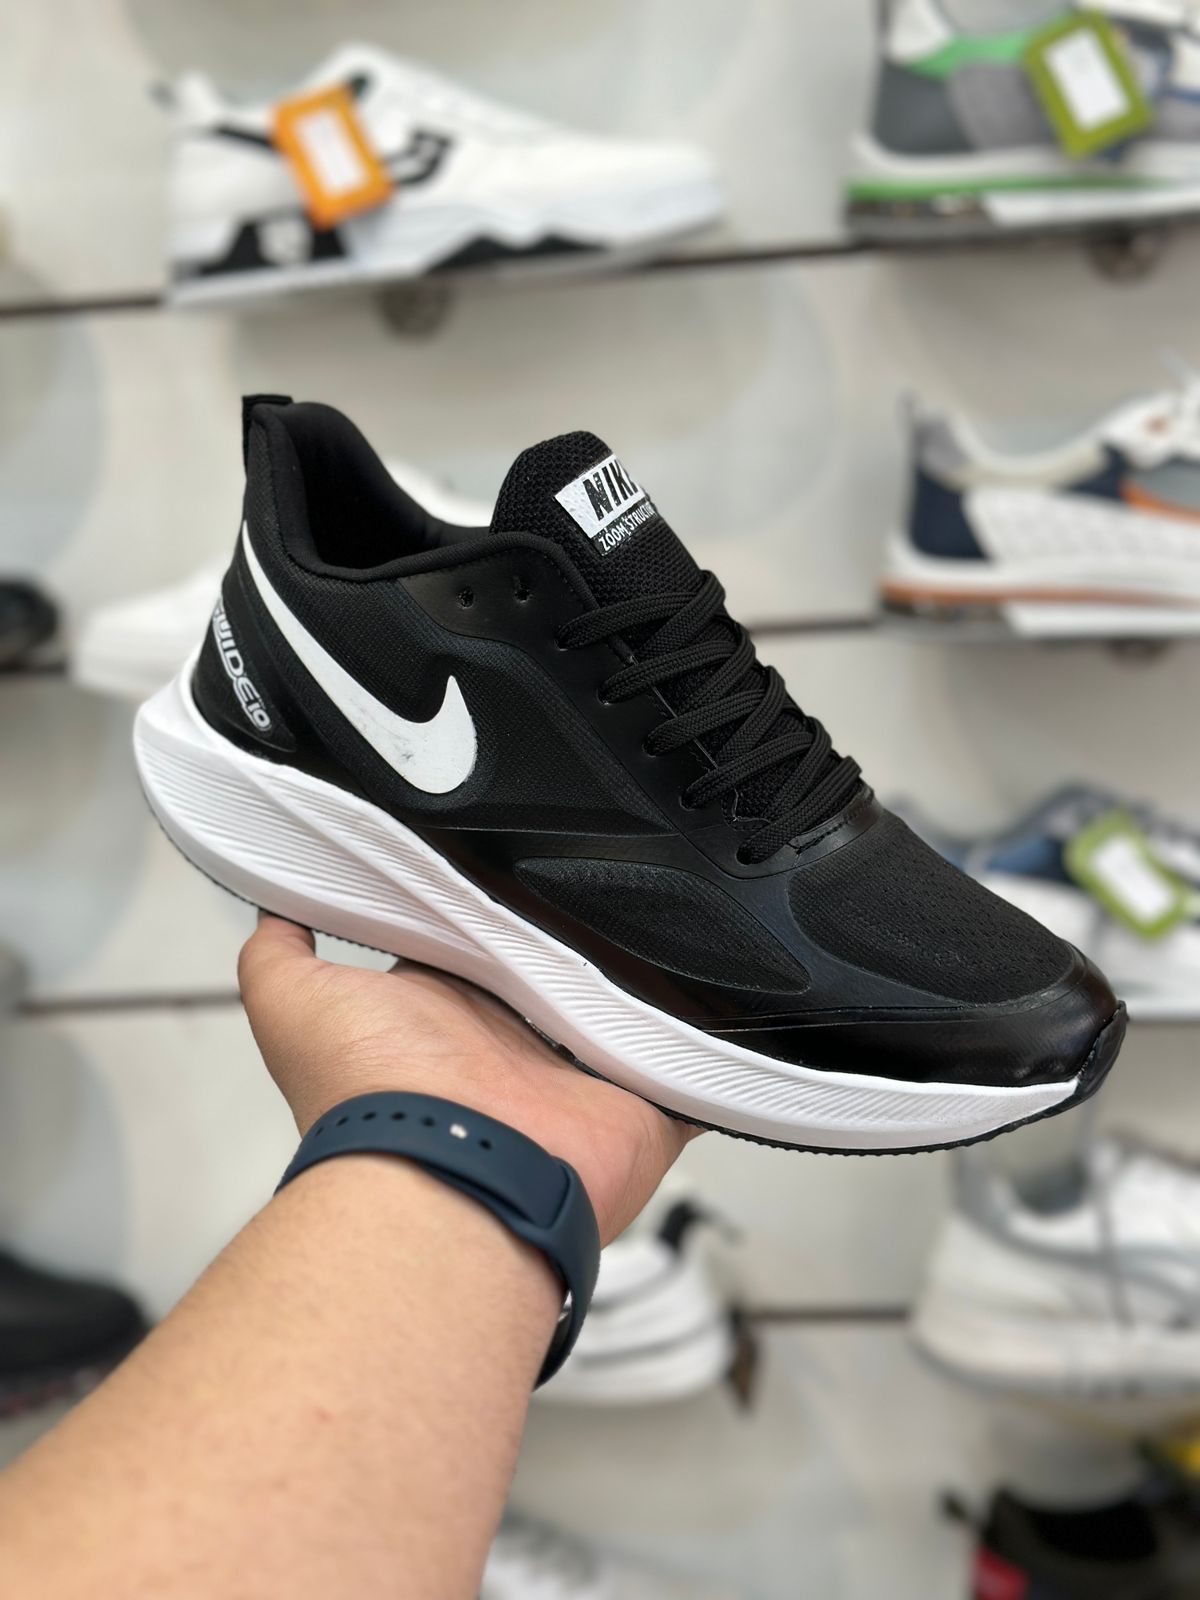 How to Identify Original Nike Shoes. Authentic Nikes generate millions in  income each year, and counterfeiters try to take advantage of t… | Nike  shoes, Nike, Shoes